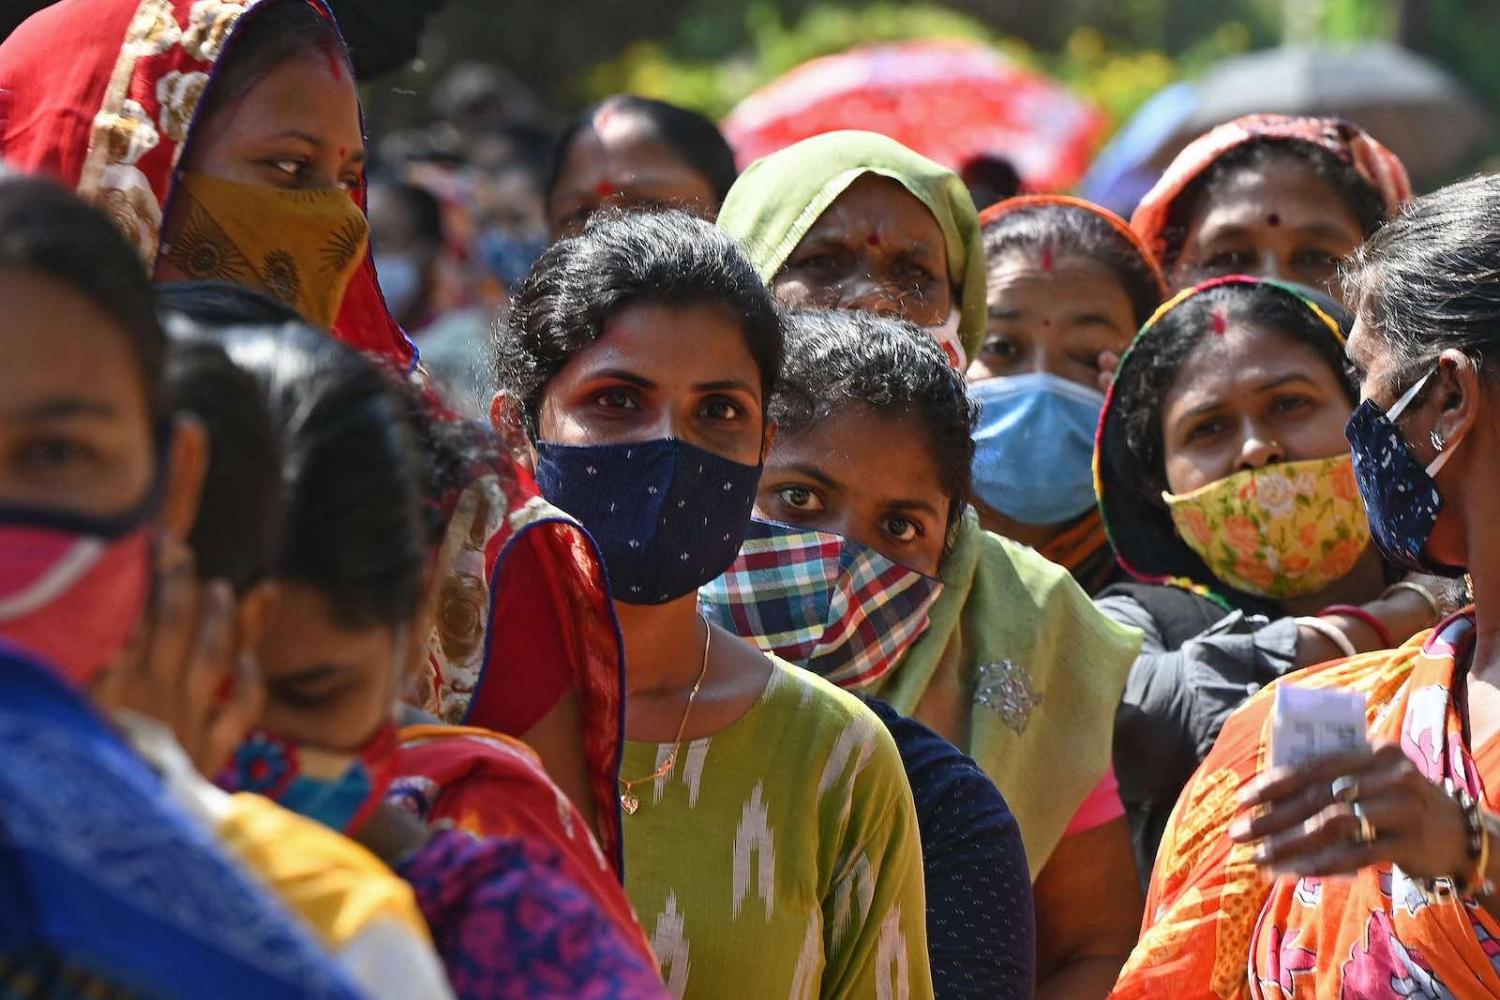 Women wait to cast their ballots during the fifth phase of West Bengal’s state legislative assembly elections, 17 April 2021 in Kolkata (Dibyangshu Sarkar/AFP via Getty Images)